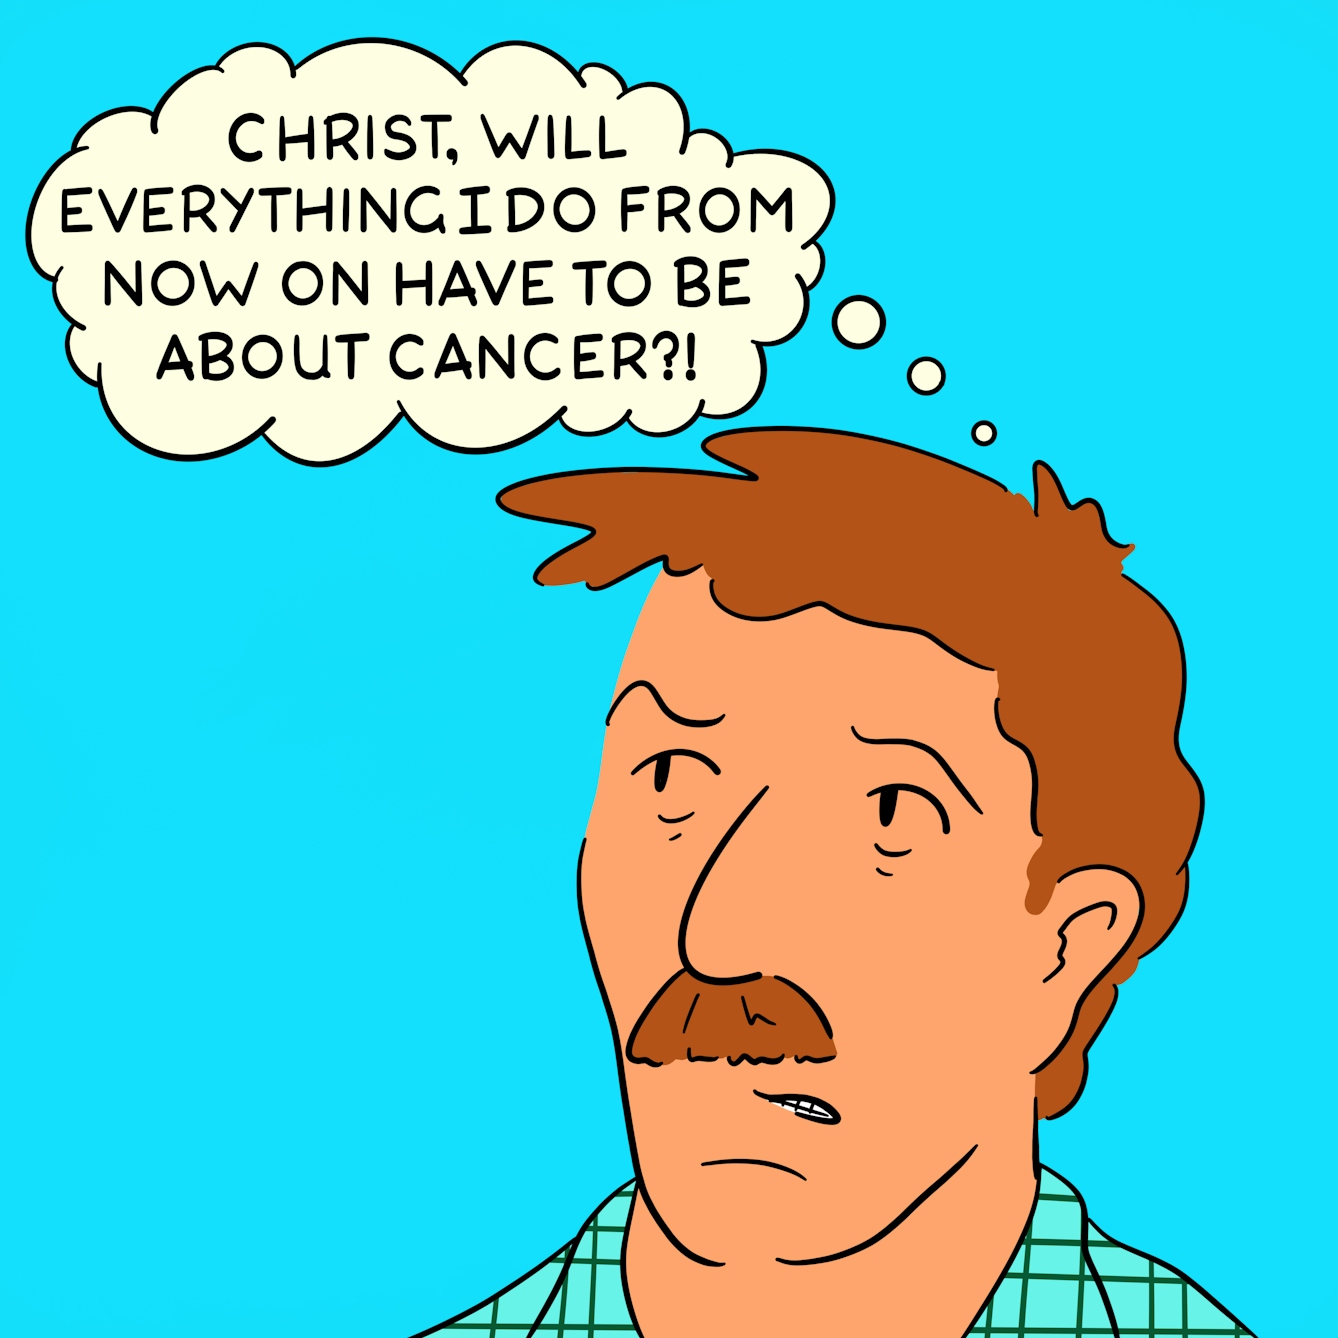 Panel 4 of a four-panel comic drawn digitally: A close-up of a moustached man's face bearing a pained expression, biting his lip and gazing into the distance. A thought bubble reads "Christ, will everything I do from now on have to be about cancer?!"